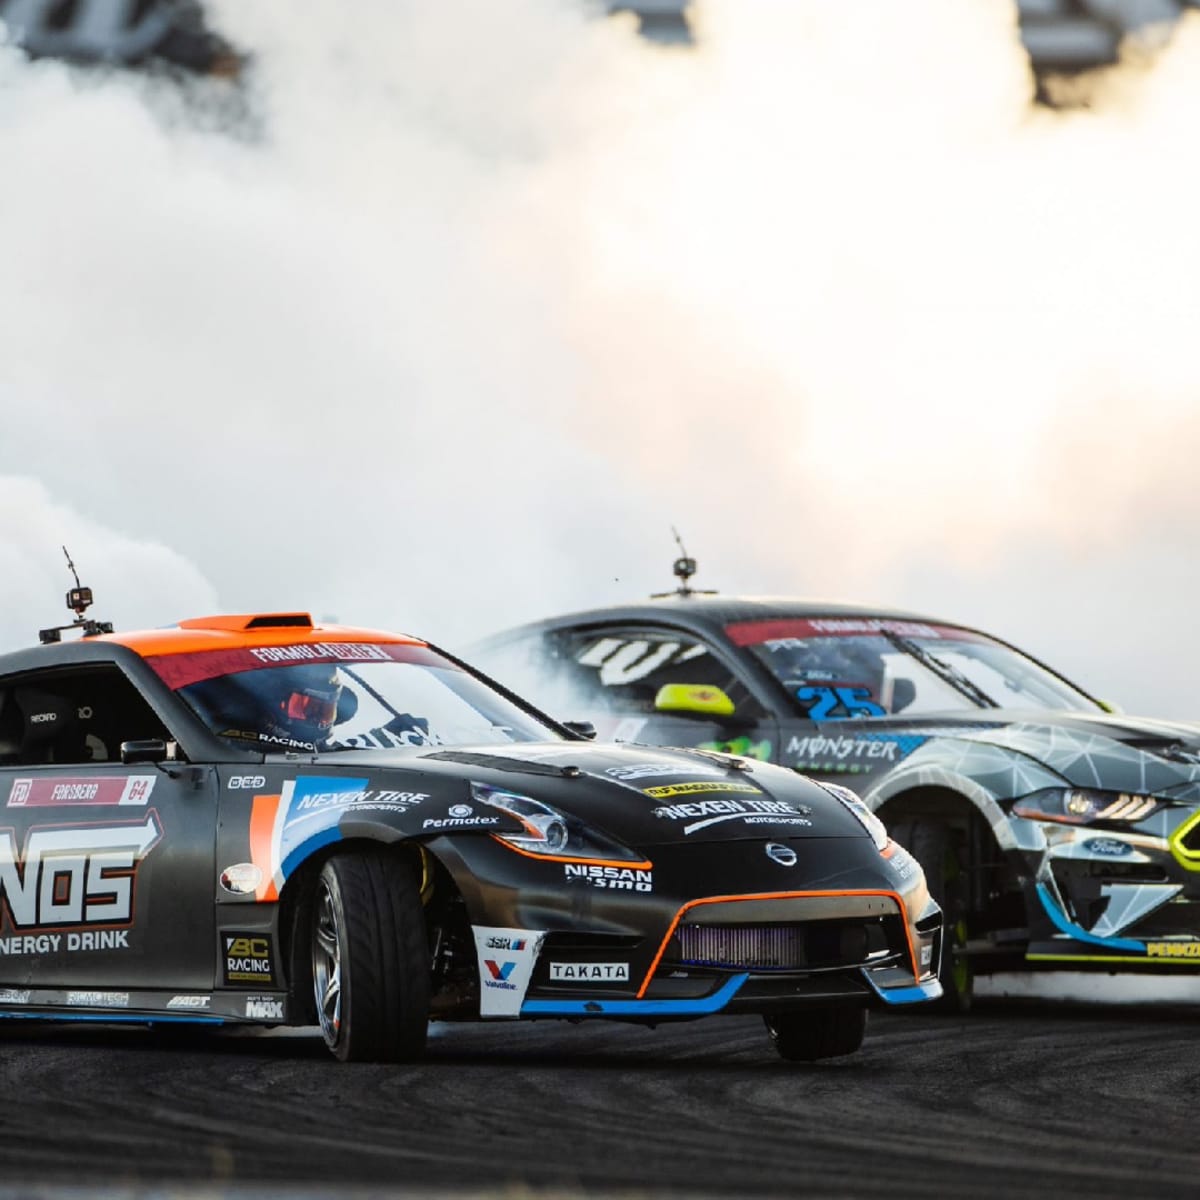 Formula Drift This Years Hottest Motorsports Series Mens Journal